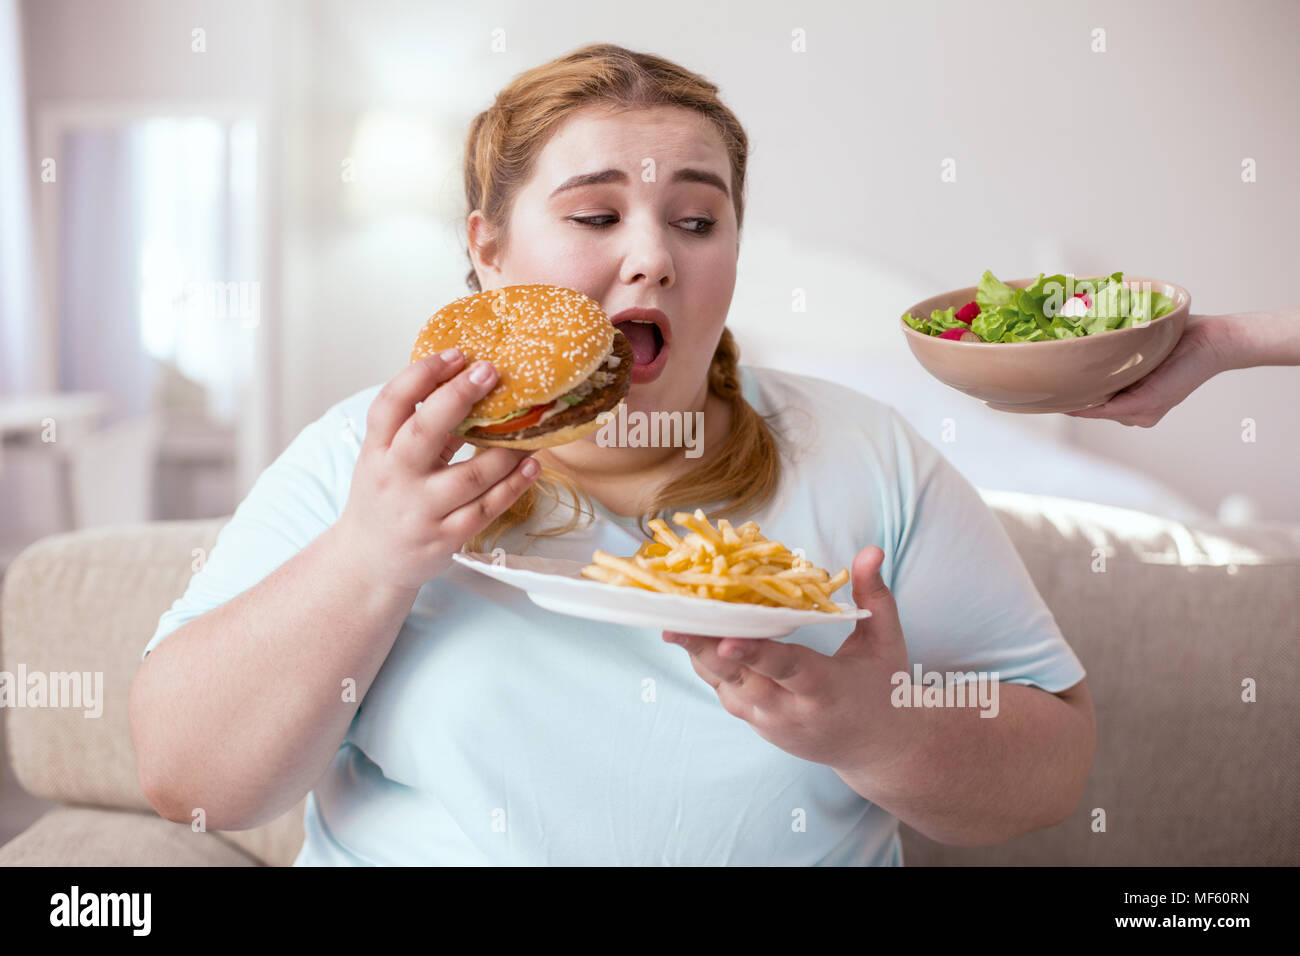 Chubby young woman thinking about her unhealthy eating habits Stock Photo